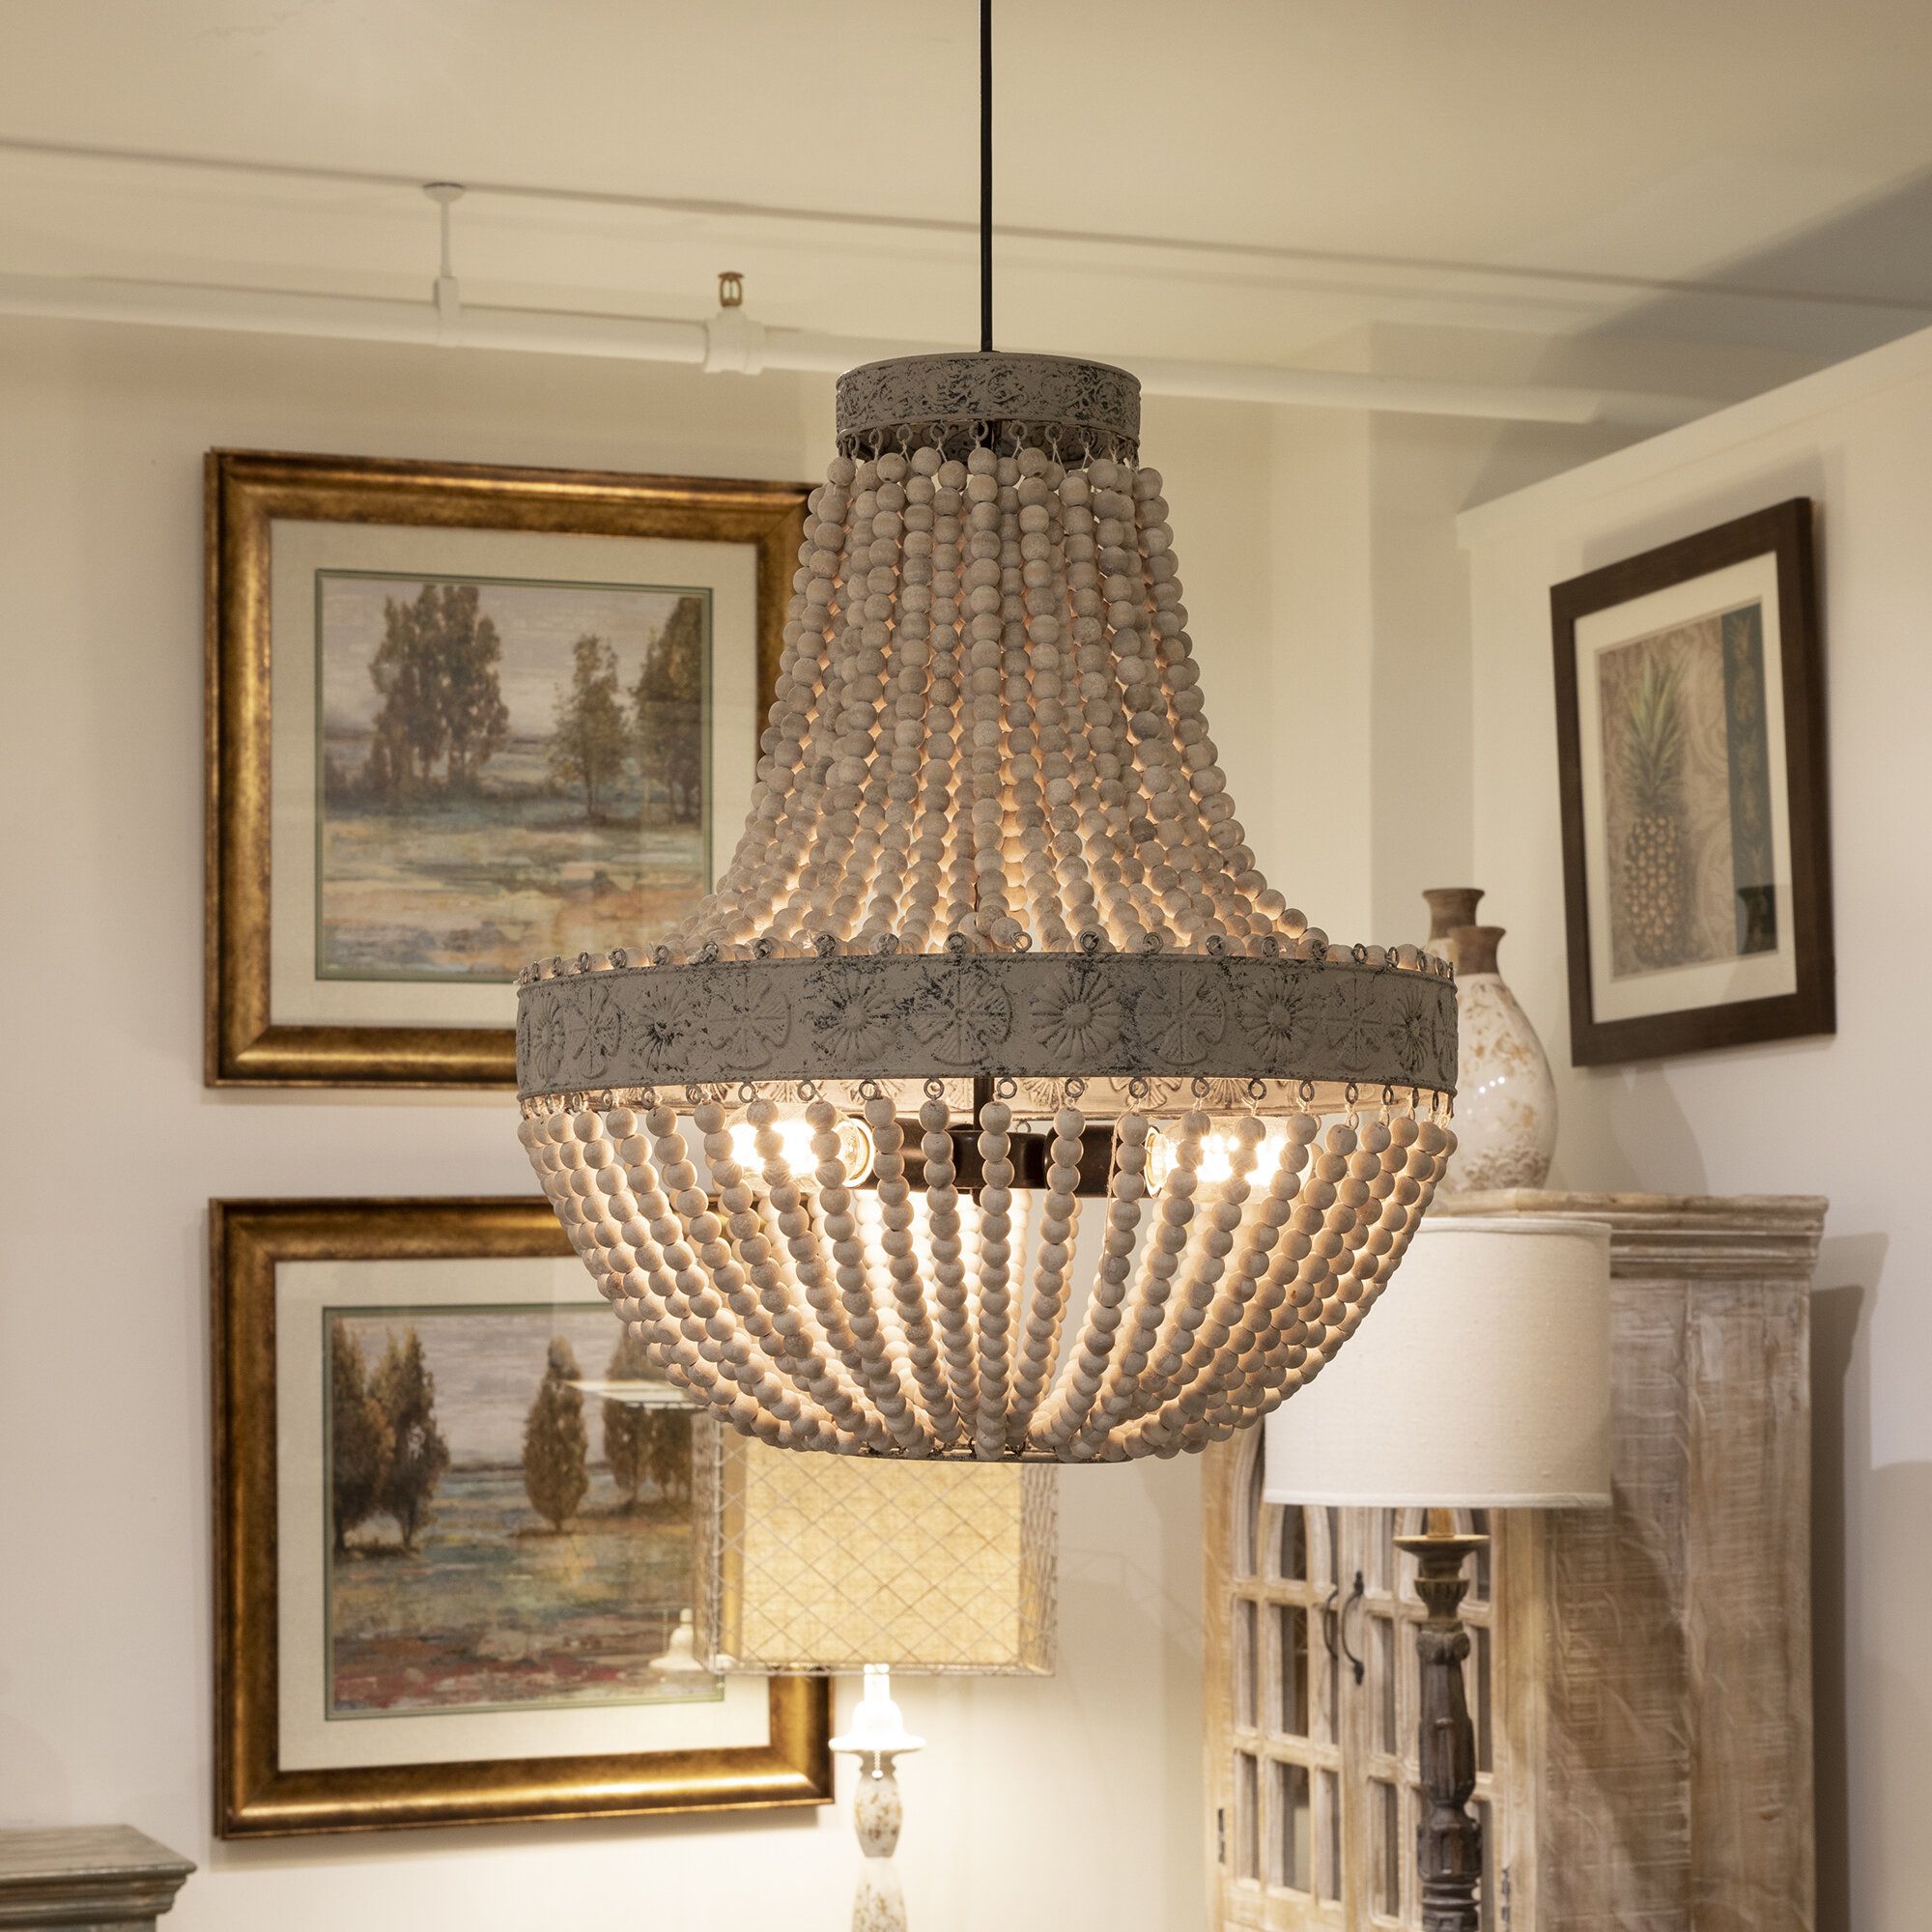 3 Empire Chandeliers You'll Love In 2019 | Wayfair Within Nehemiah 3 Light Empire Chandeliers (View 20 of 30)